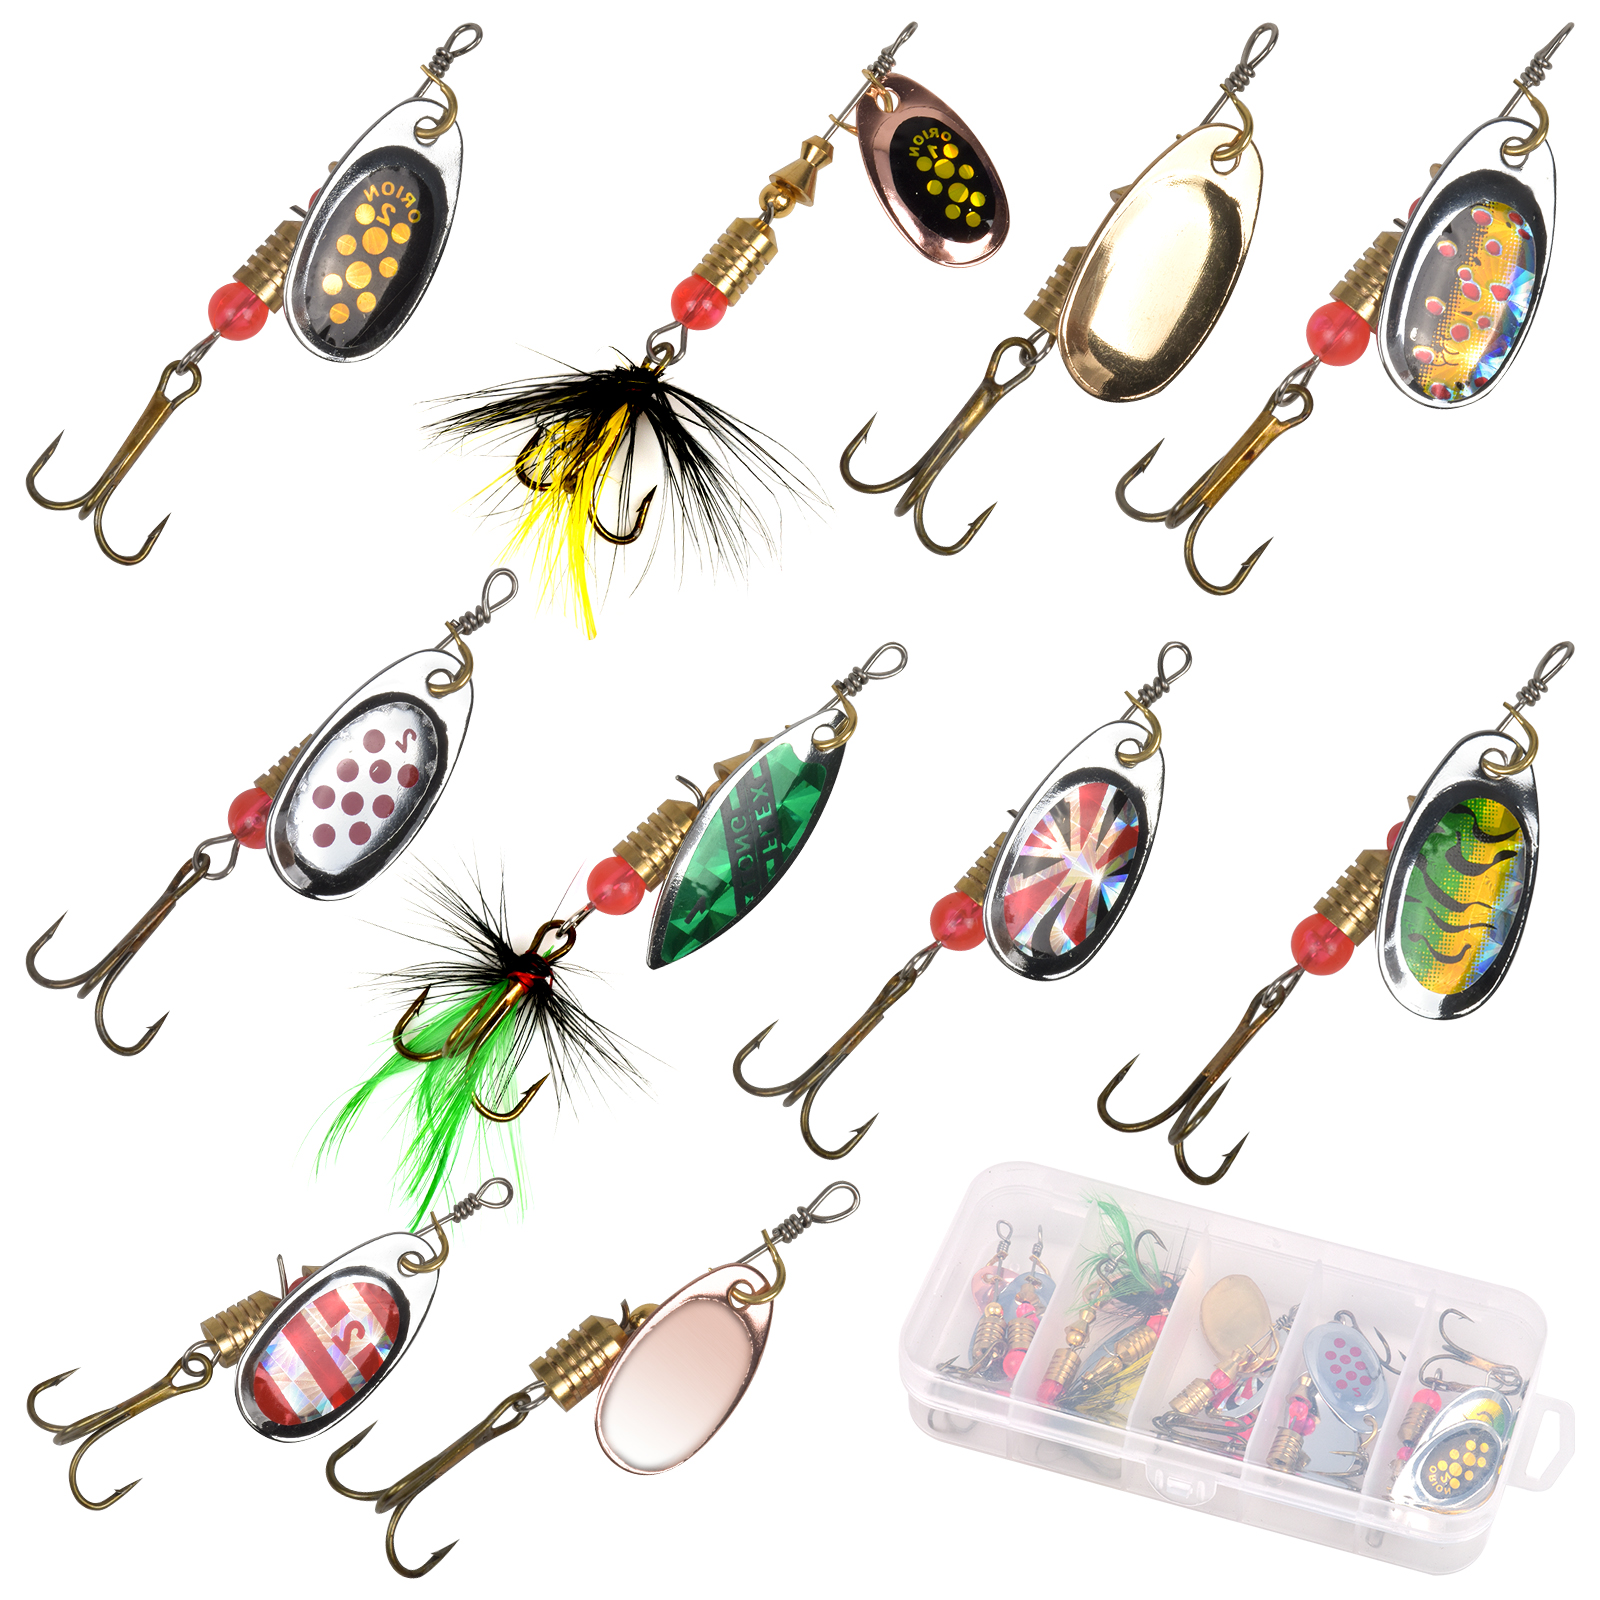 10pcs Fishing Spinners & Lures Kit - Perfect for Trout, Pike, Perch, Bass &  Salmon!